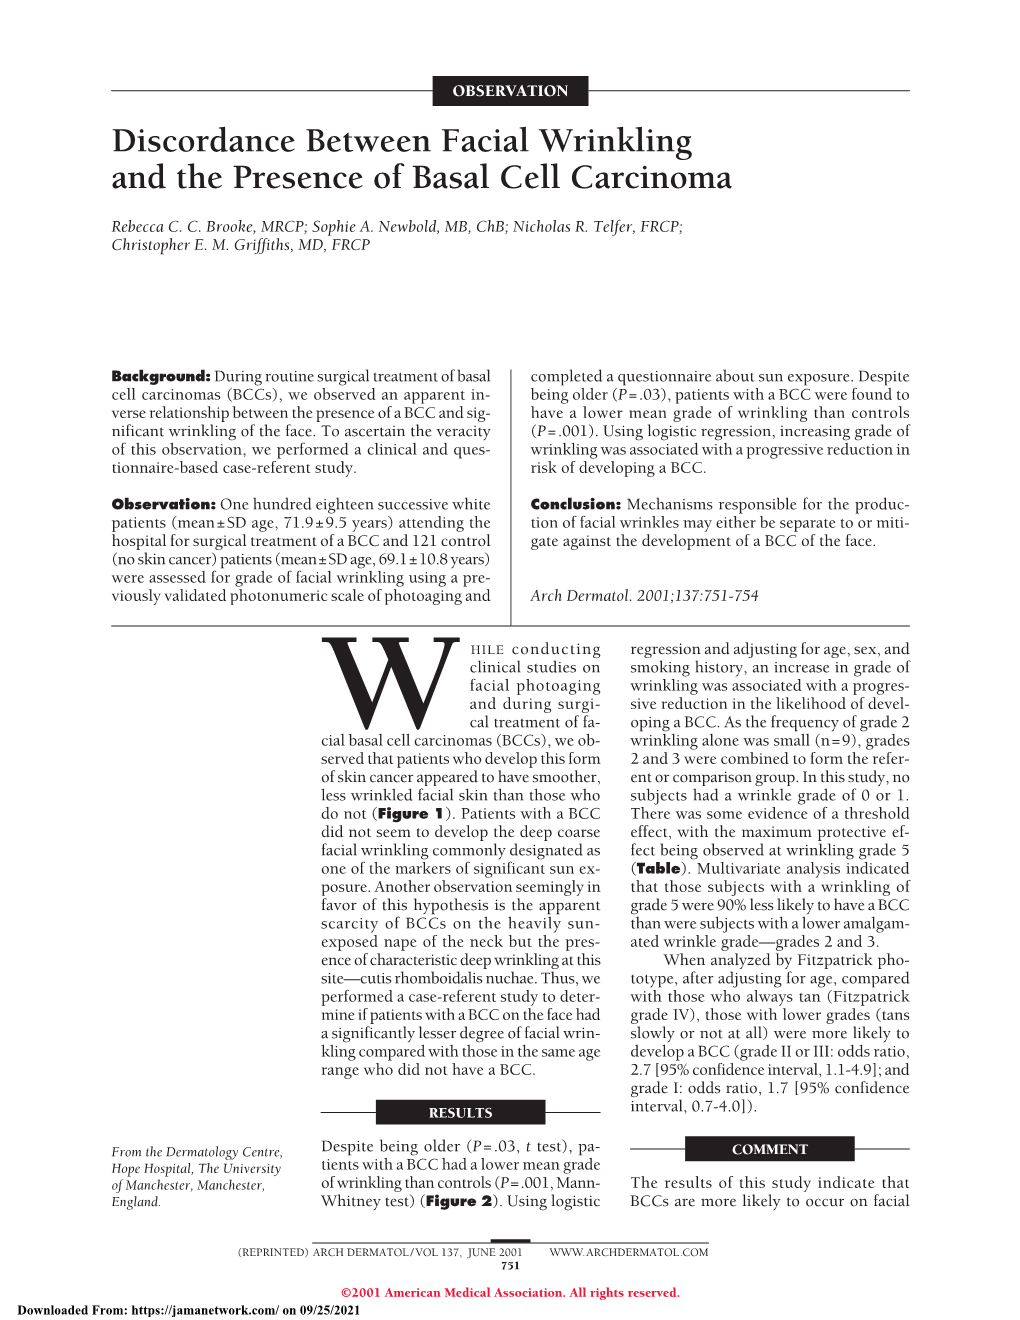 Discordance Between Facial Wrinkling and the Presence of Basal Cell Carcinoma